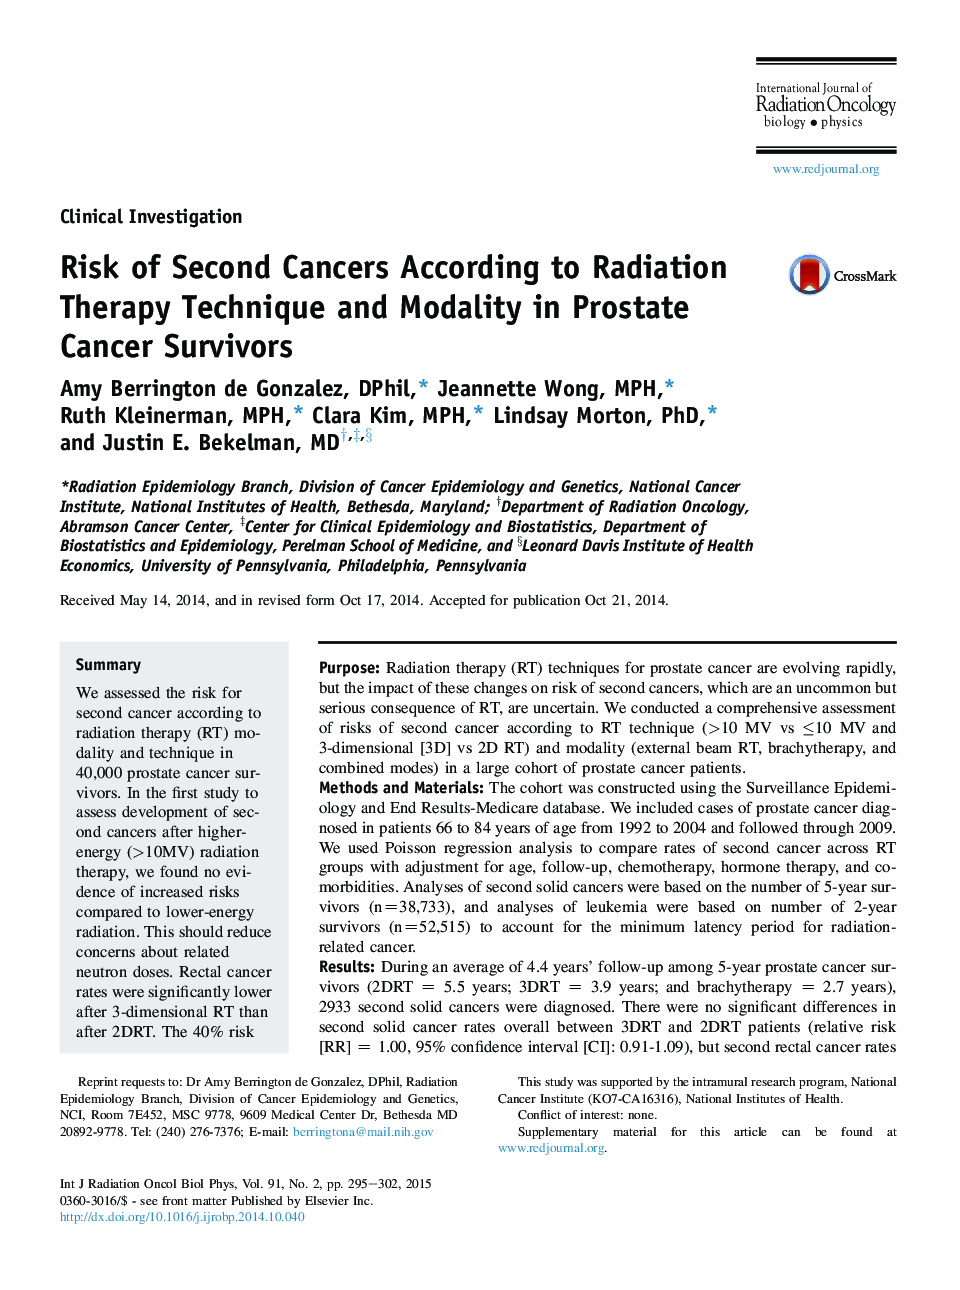 Risk of Second Cancers According to Radiation Therapy Technique and Modality in Prostate Cancer Survivors